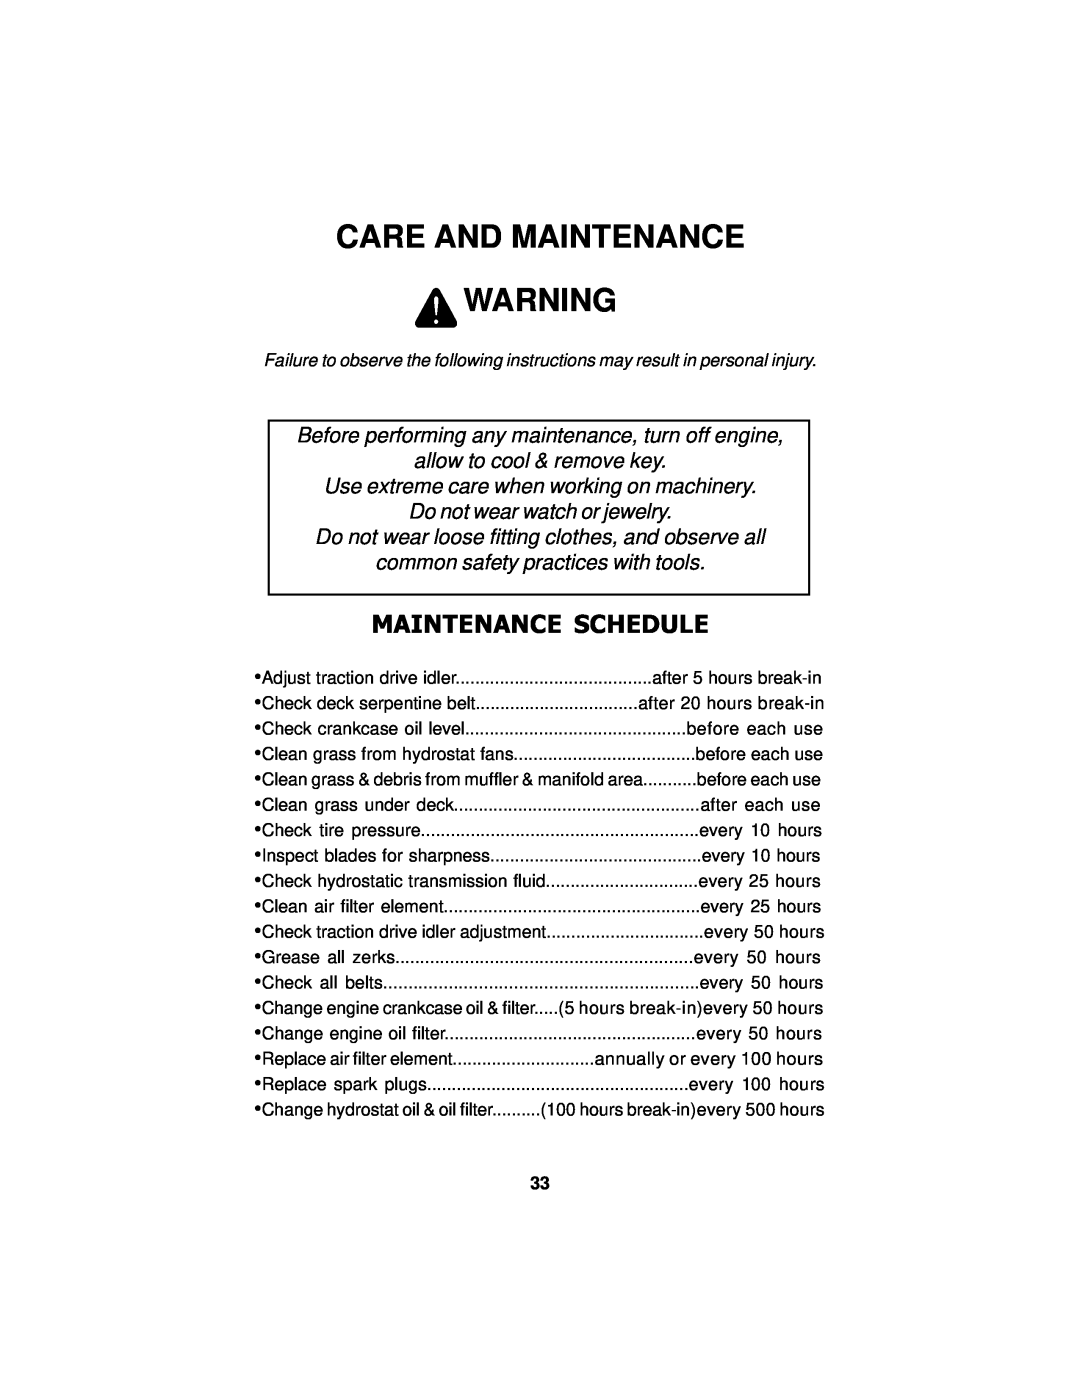 Dixon 18124-0804 manual Care And Maintenance, Maintenance Schedule, Before performing any maintenance, turn off engine 